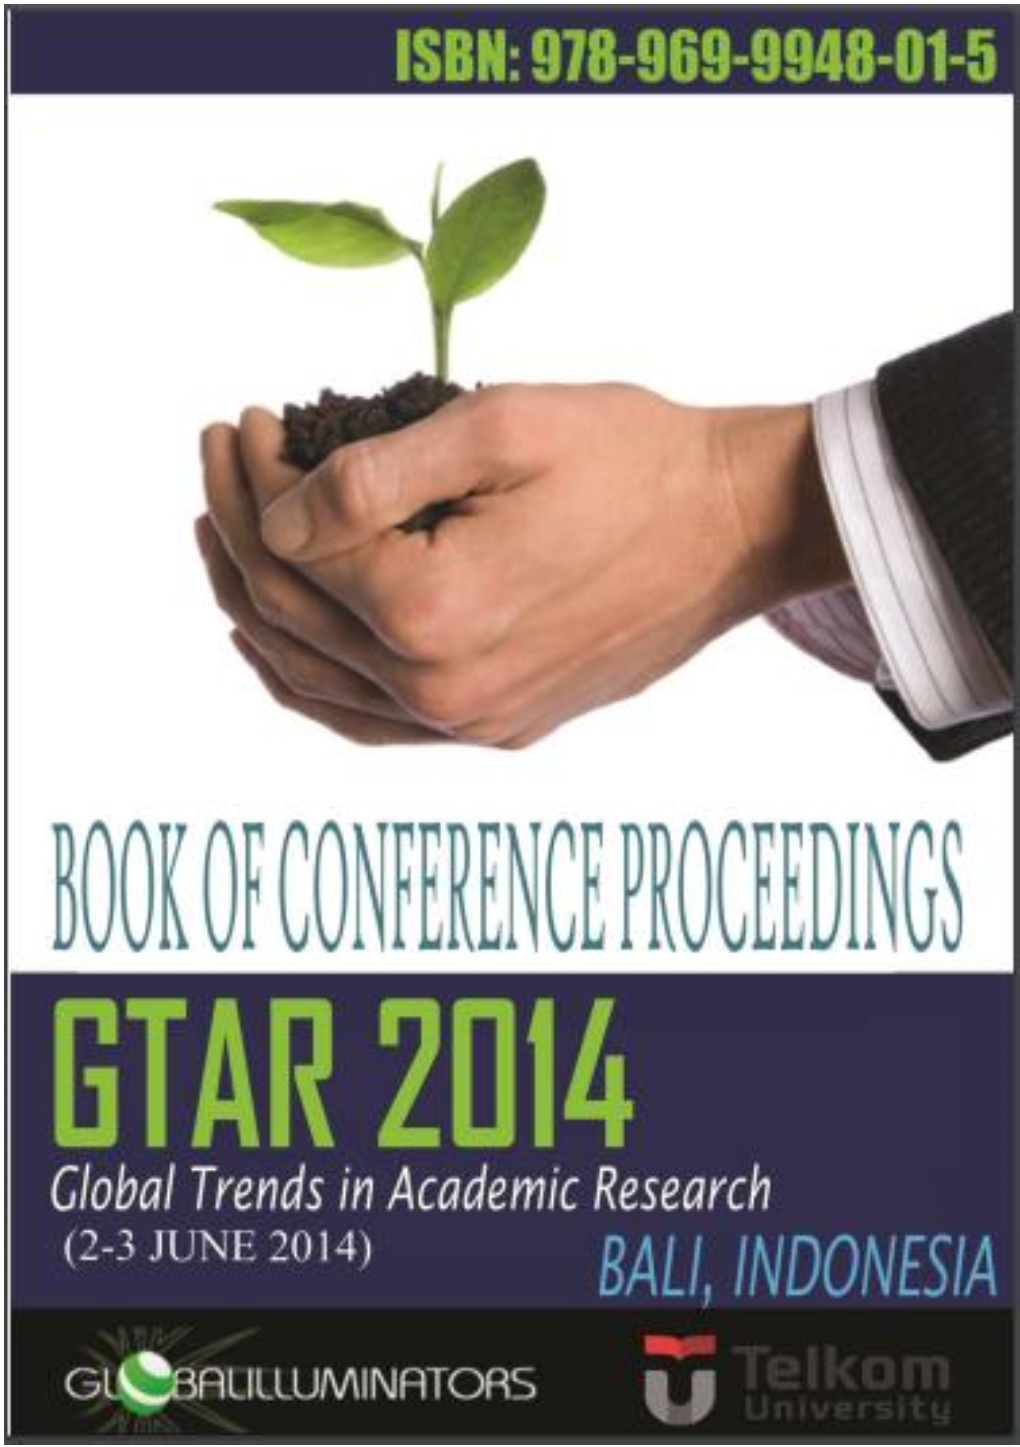 Conference Proceedings Book (Gtar-2014)